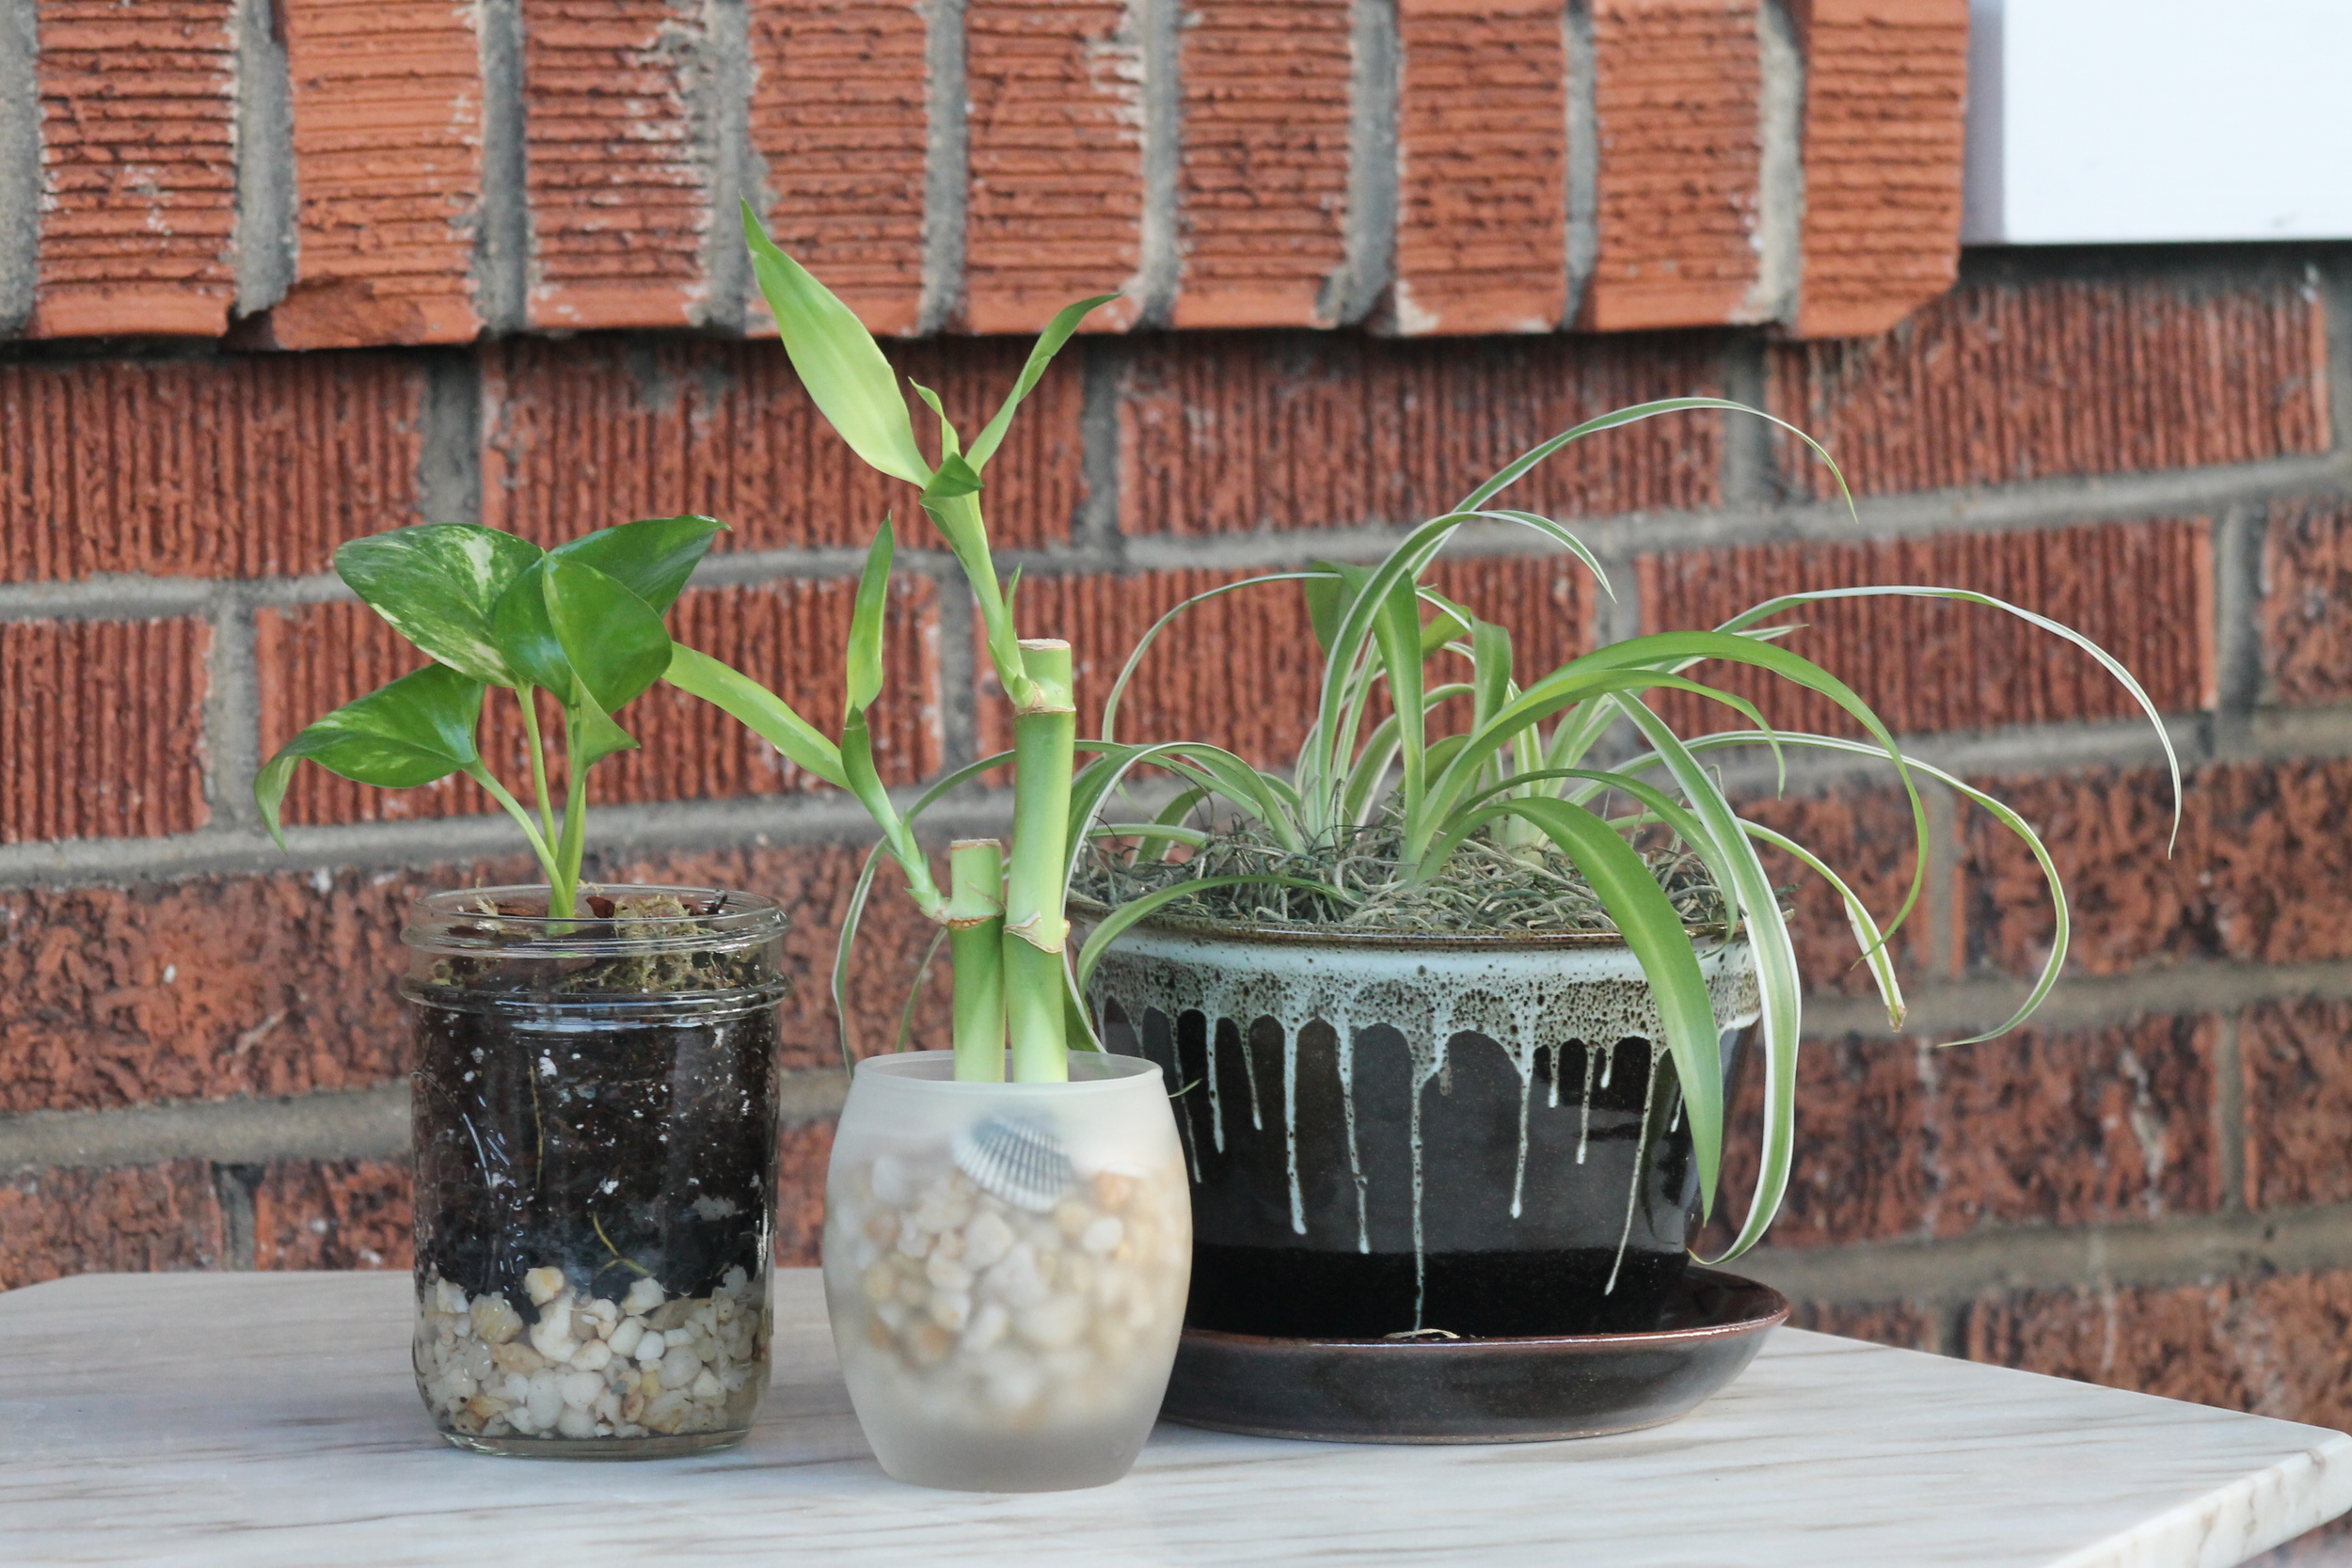  our terrariums are designed with&nbsp;young plants that will thrive&nbsp;in their containers for many years to come 